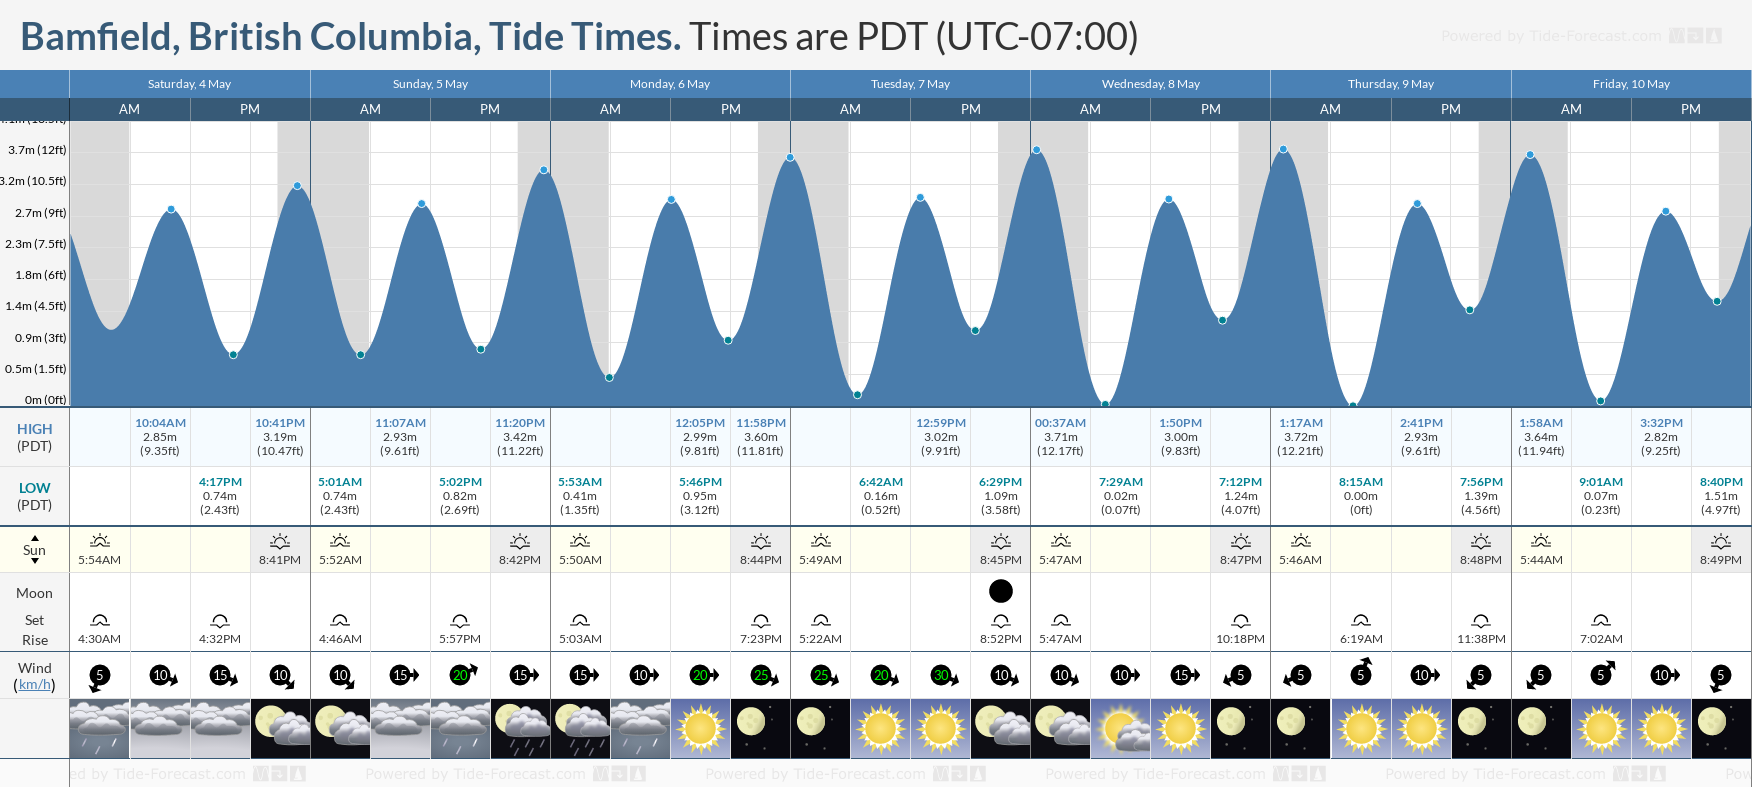 Bamfield, British Columbia Tide Chart including high and low tide tide times for the next 7 days